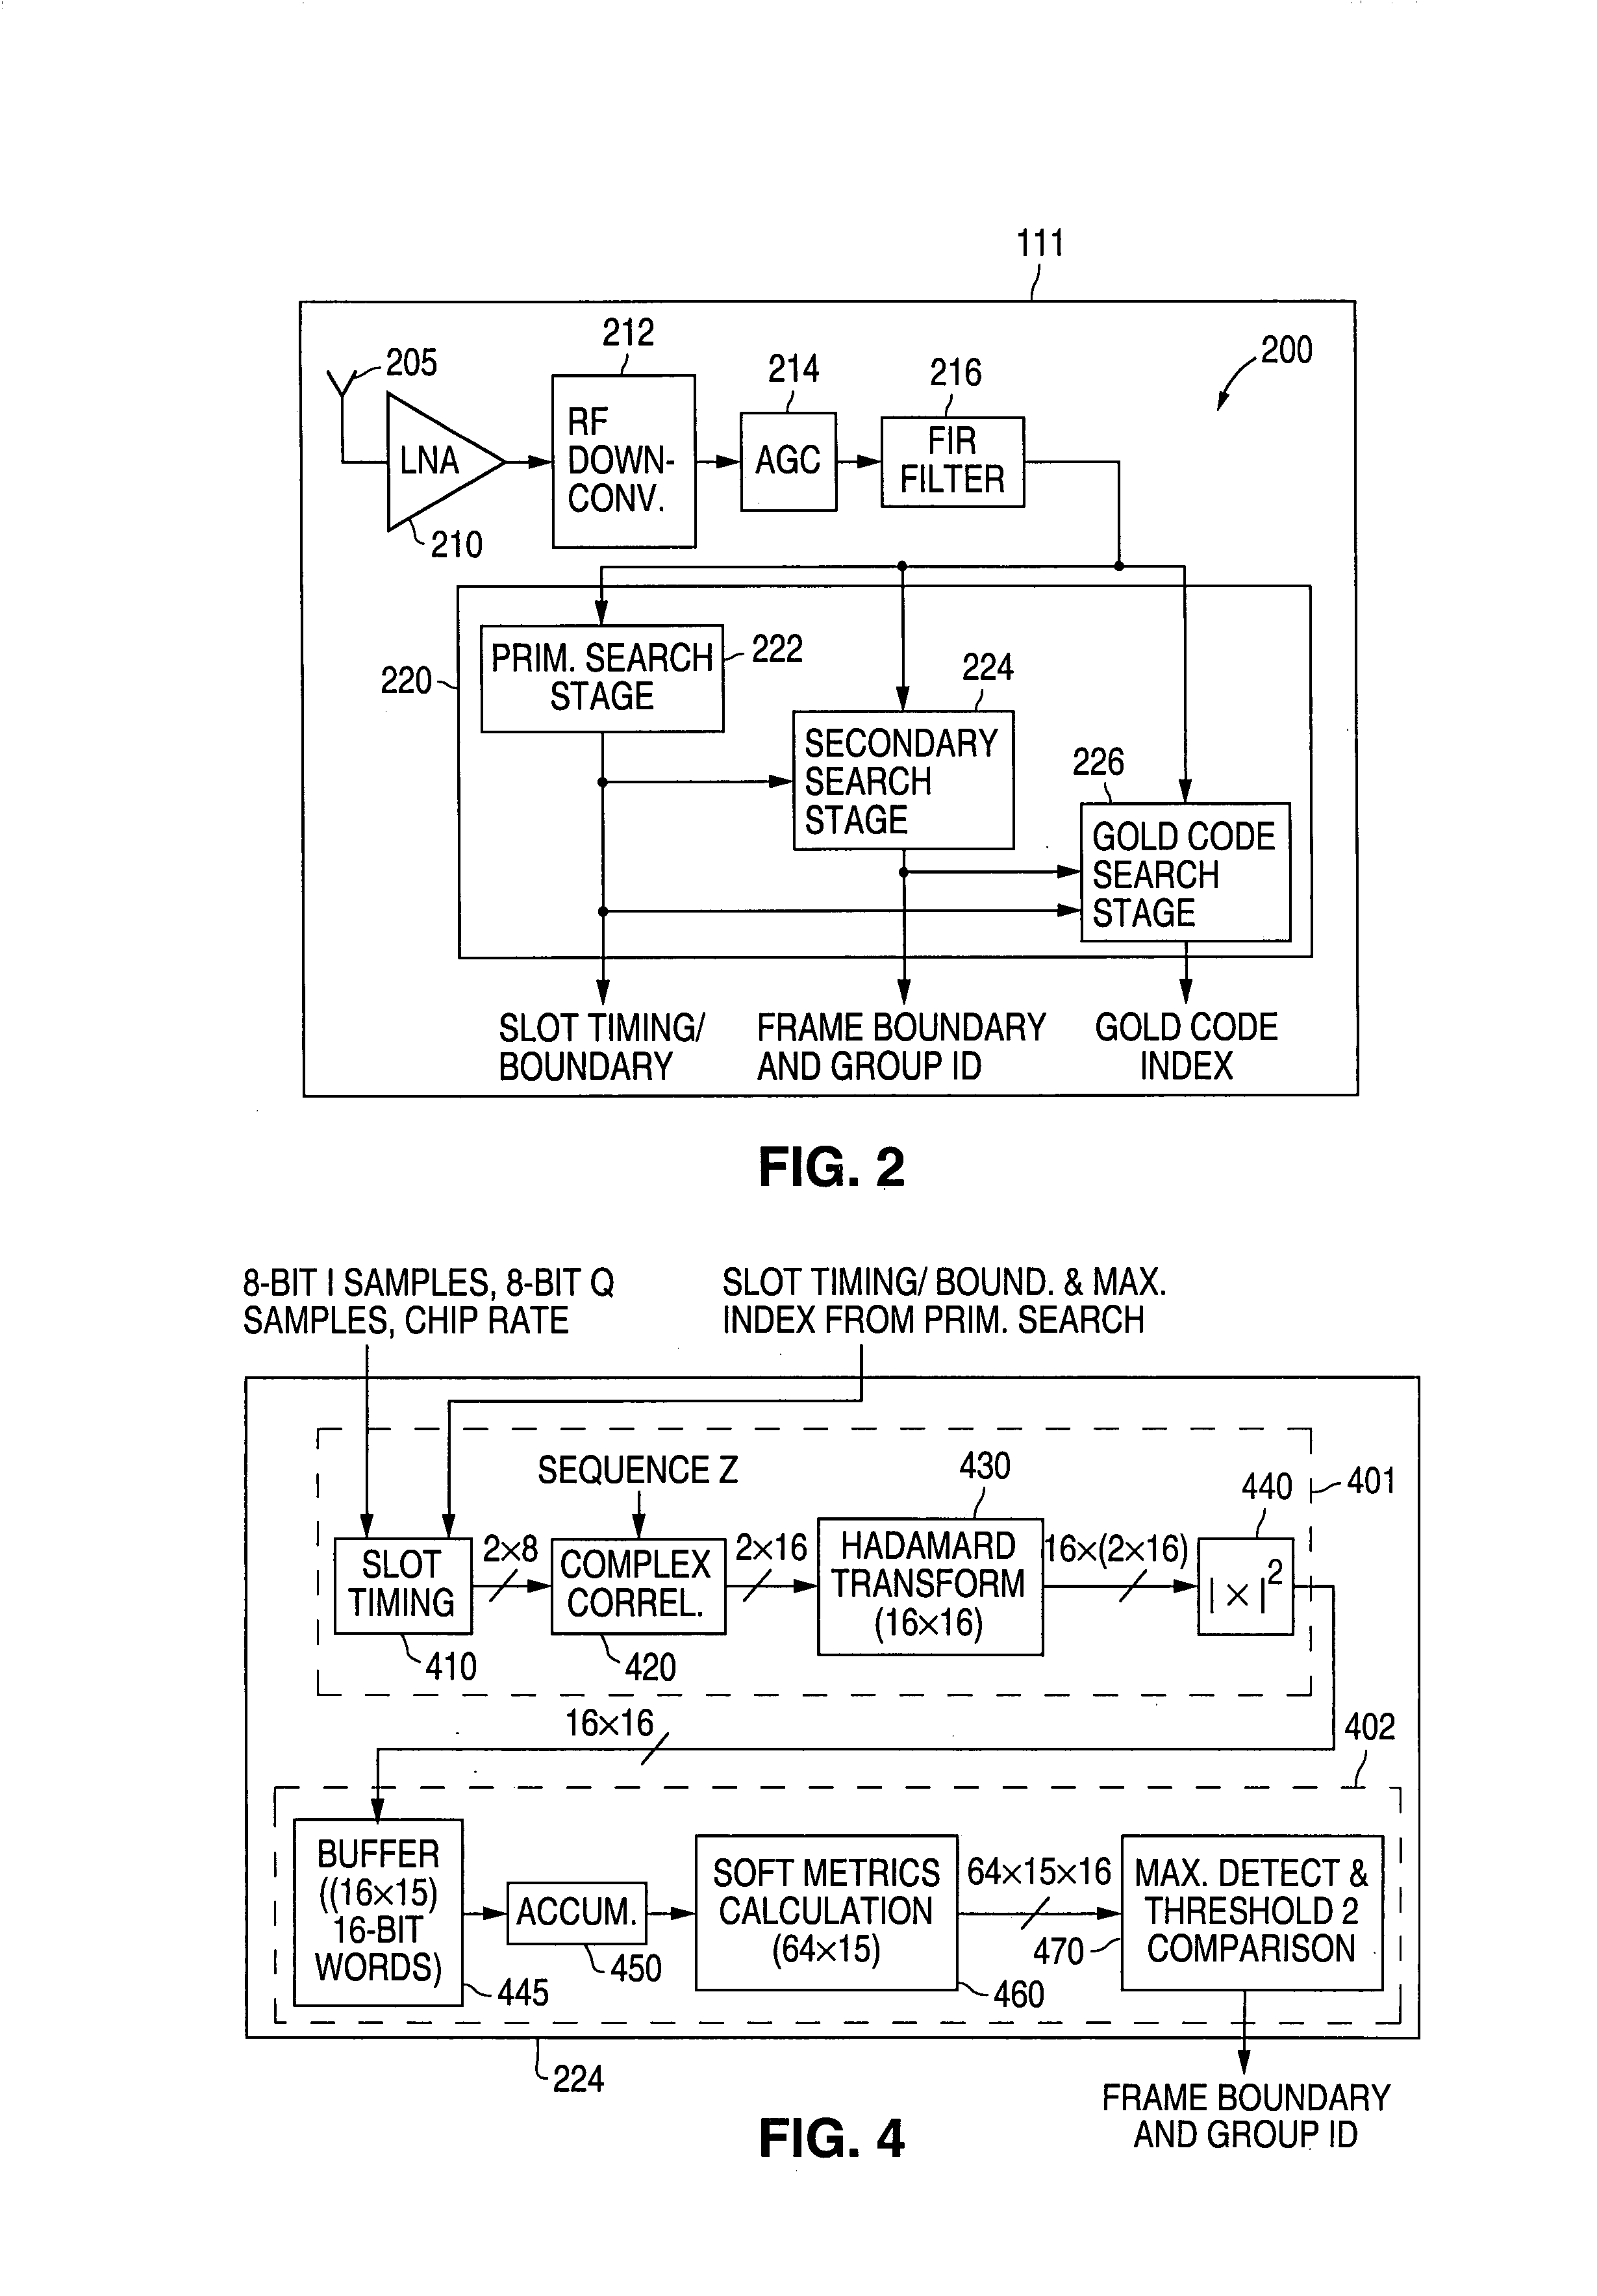 3GPP WCDMA receiver using pipelined apparatus and method for performing cell searches